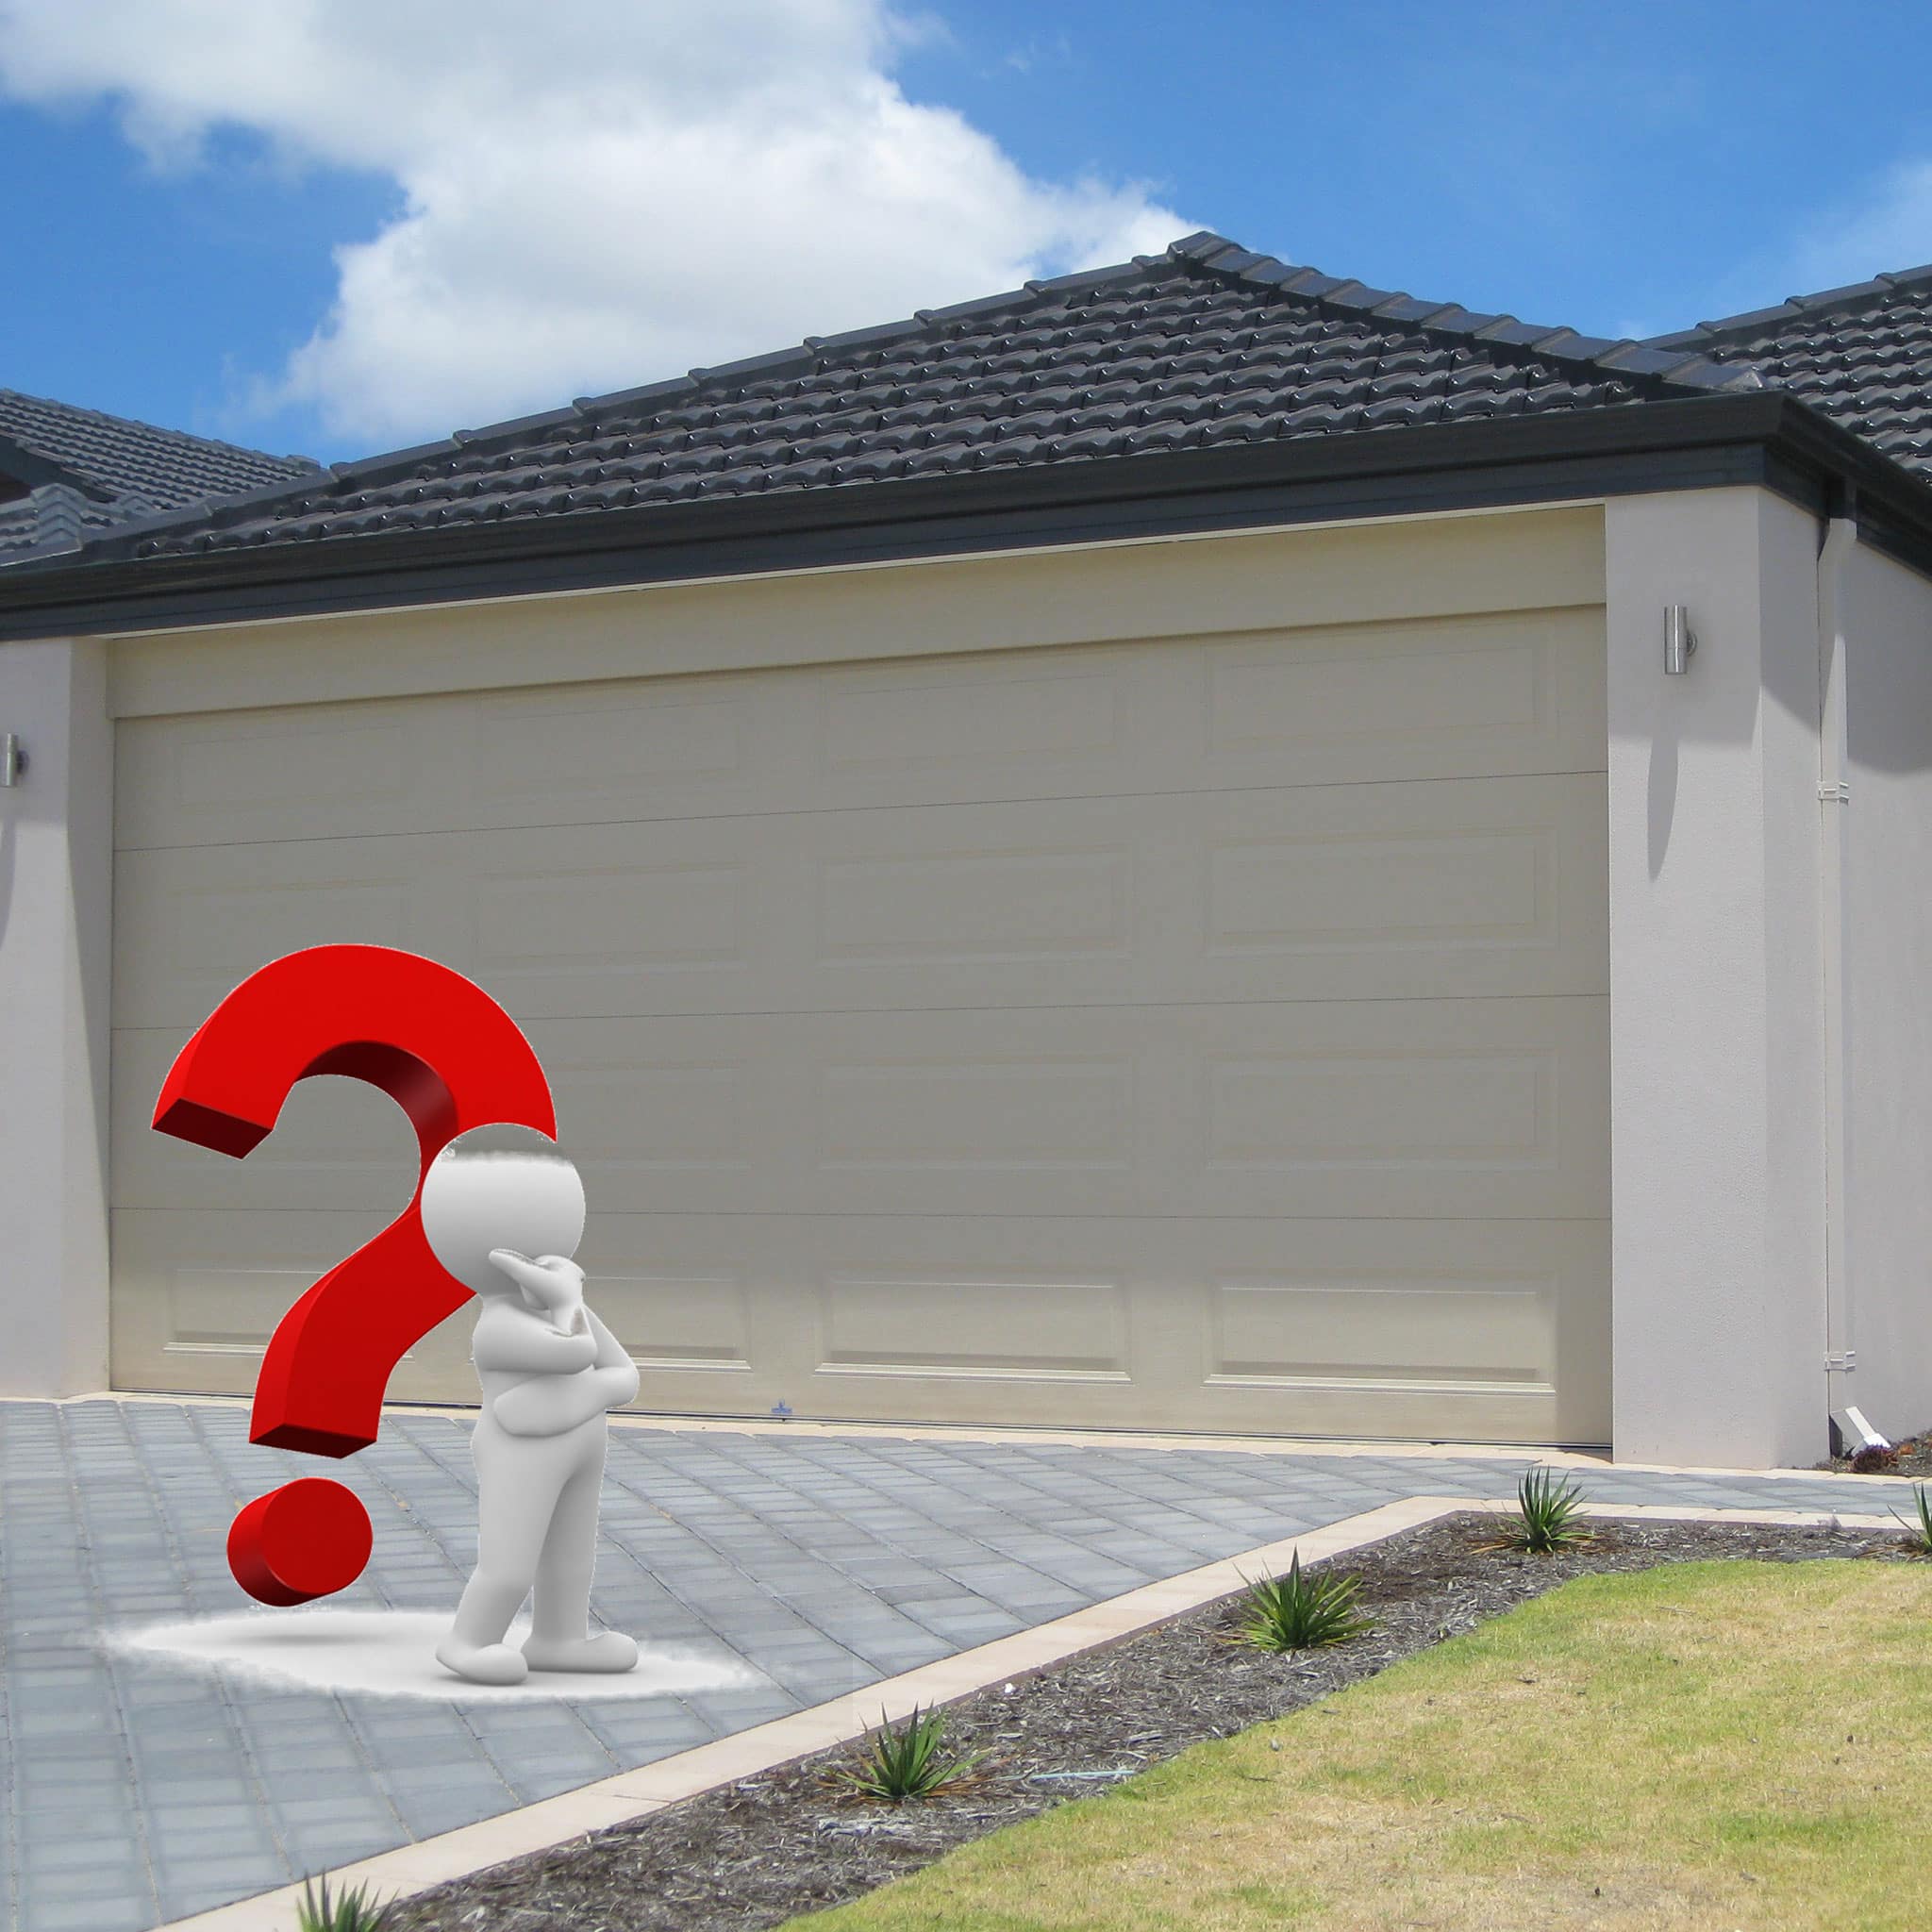 Person in thinking pose with question mark in front of a garage door of a house